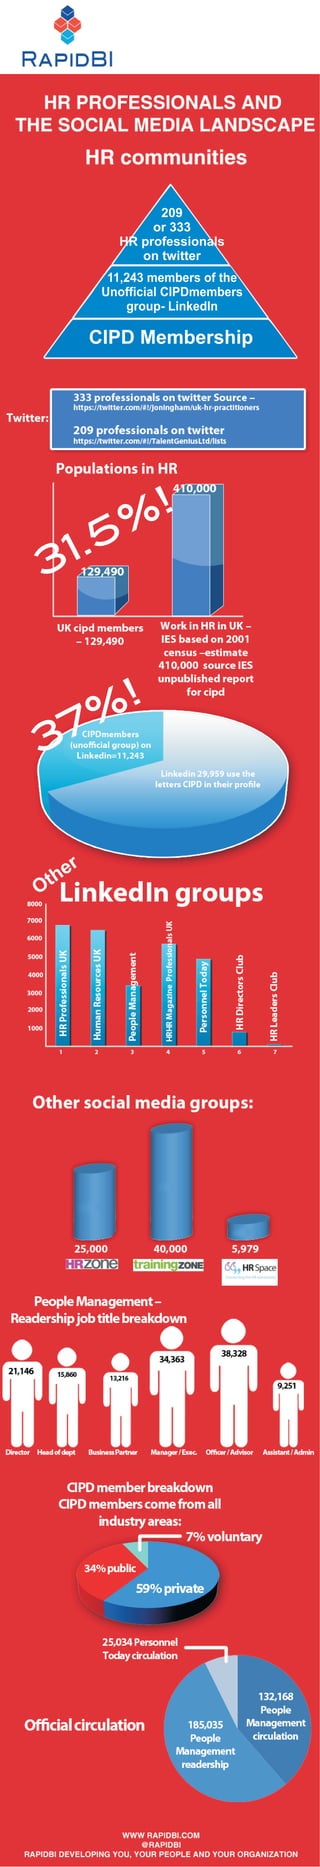 209
                  or 333
             HR professionals
                on twitter
            11,243 members of the
           Unofficial CIPDmembers
               group- LinkedIn

          CIPD Membership




                    !
          5 %
31.


               !
 7 %
3


   h er
O t
 